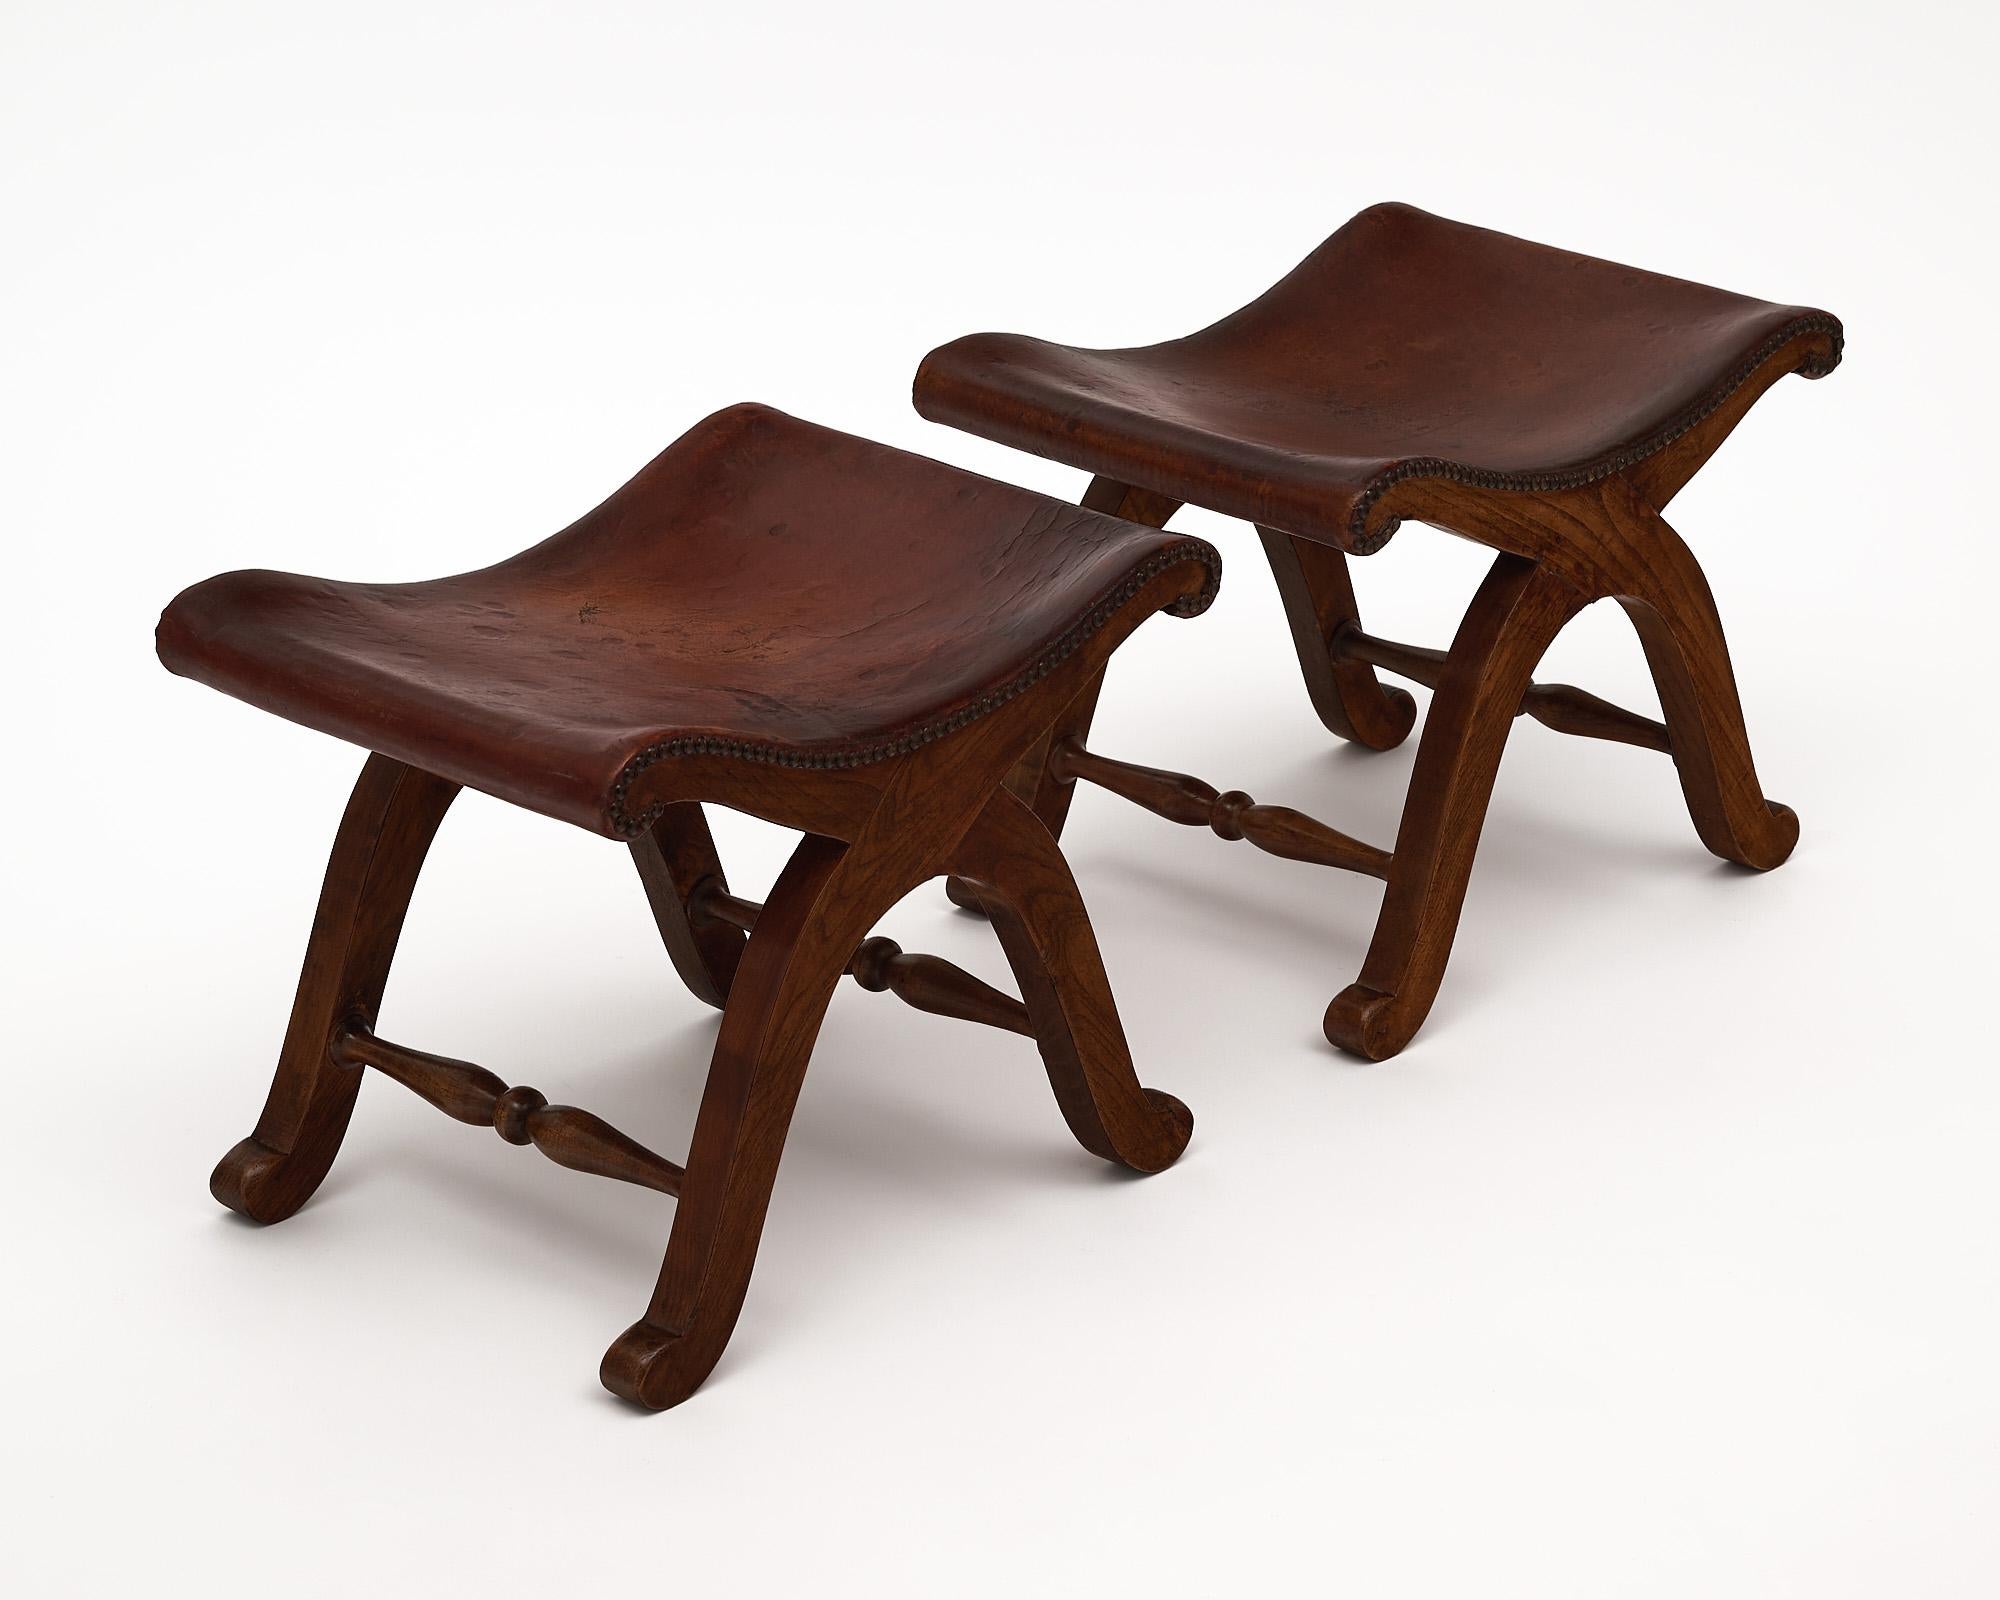 Pair of curule stools, Spanish, made of solid oak and patinated leather. This pair is by Valenti.